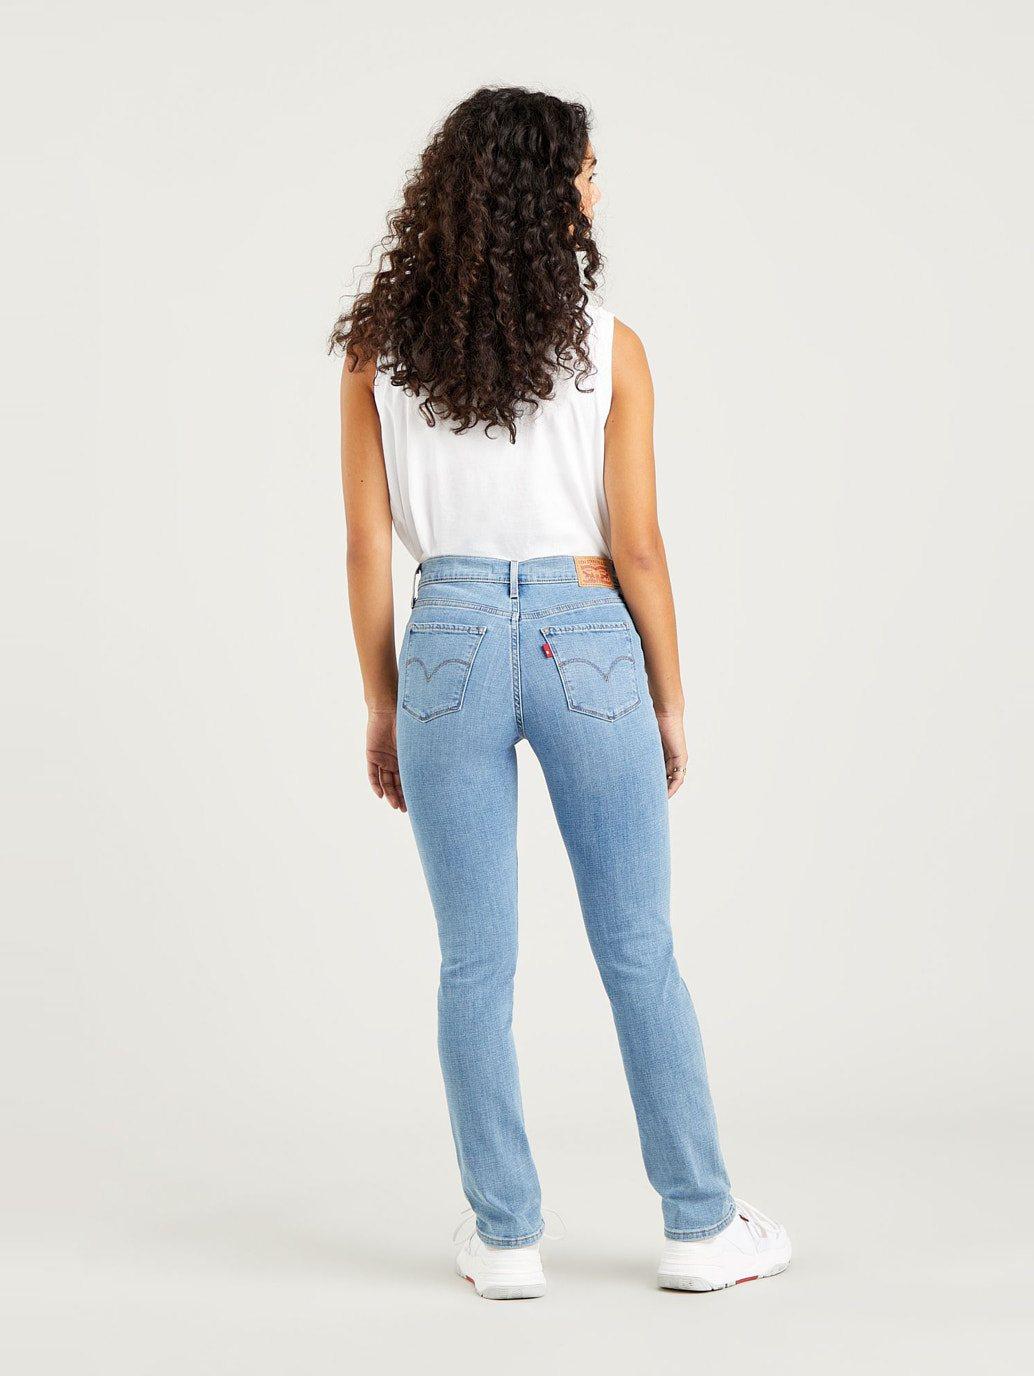 Buy Levi’s® Women's 312 Shaping Slim Fit Jeans | Levi’s® Official ...